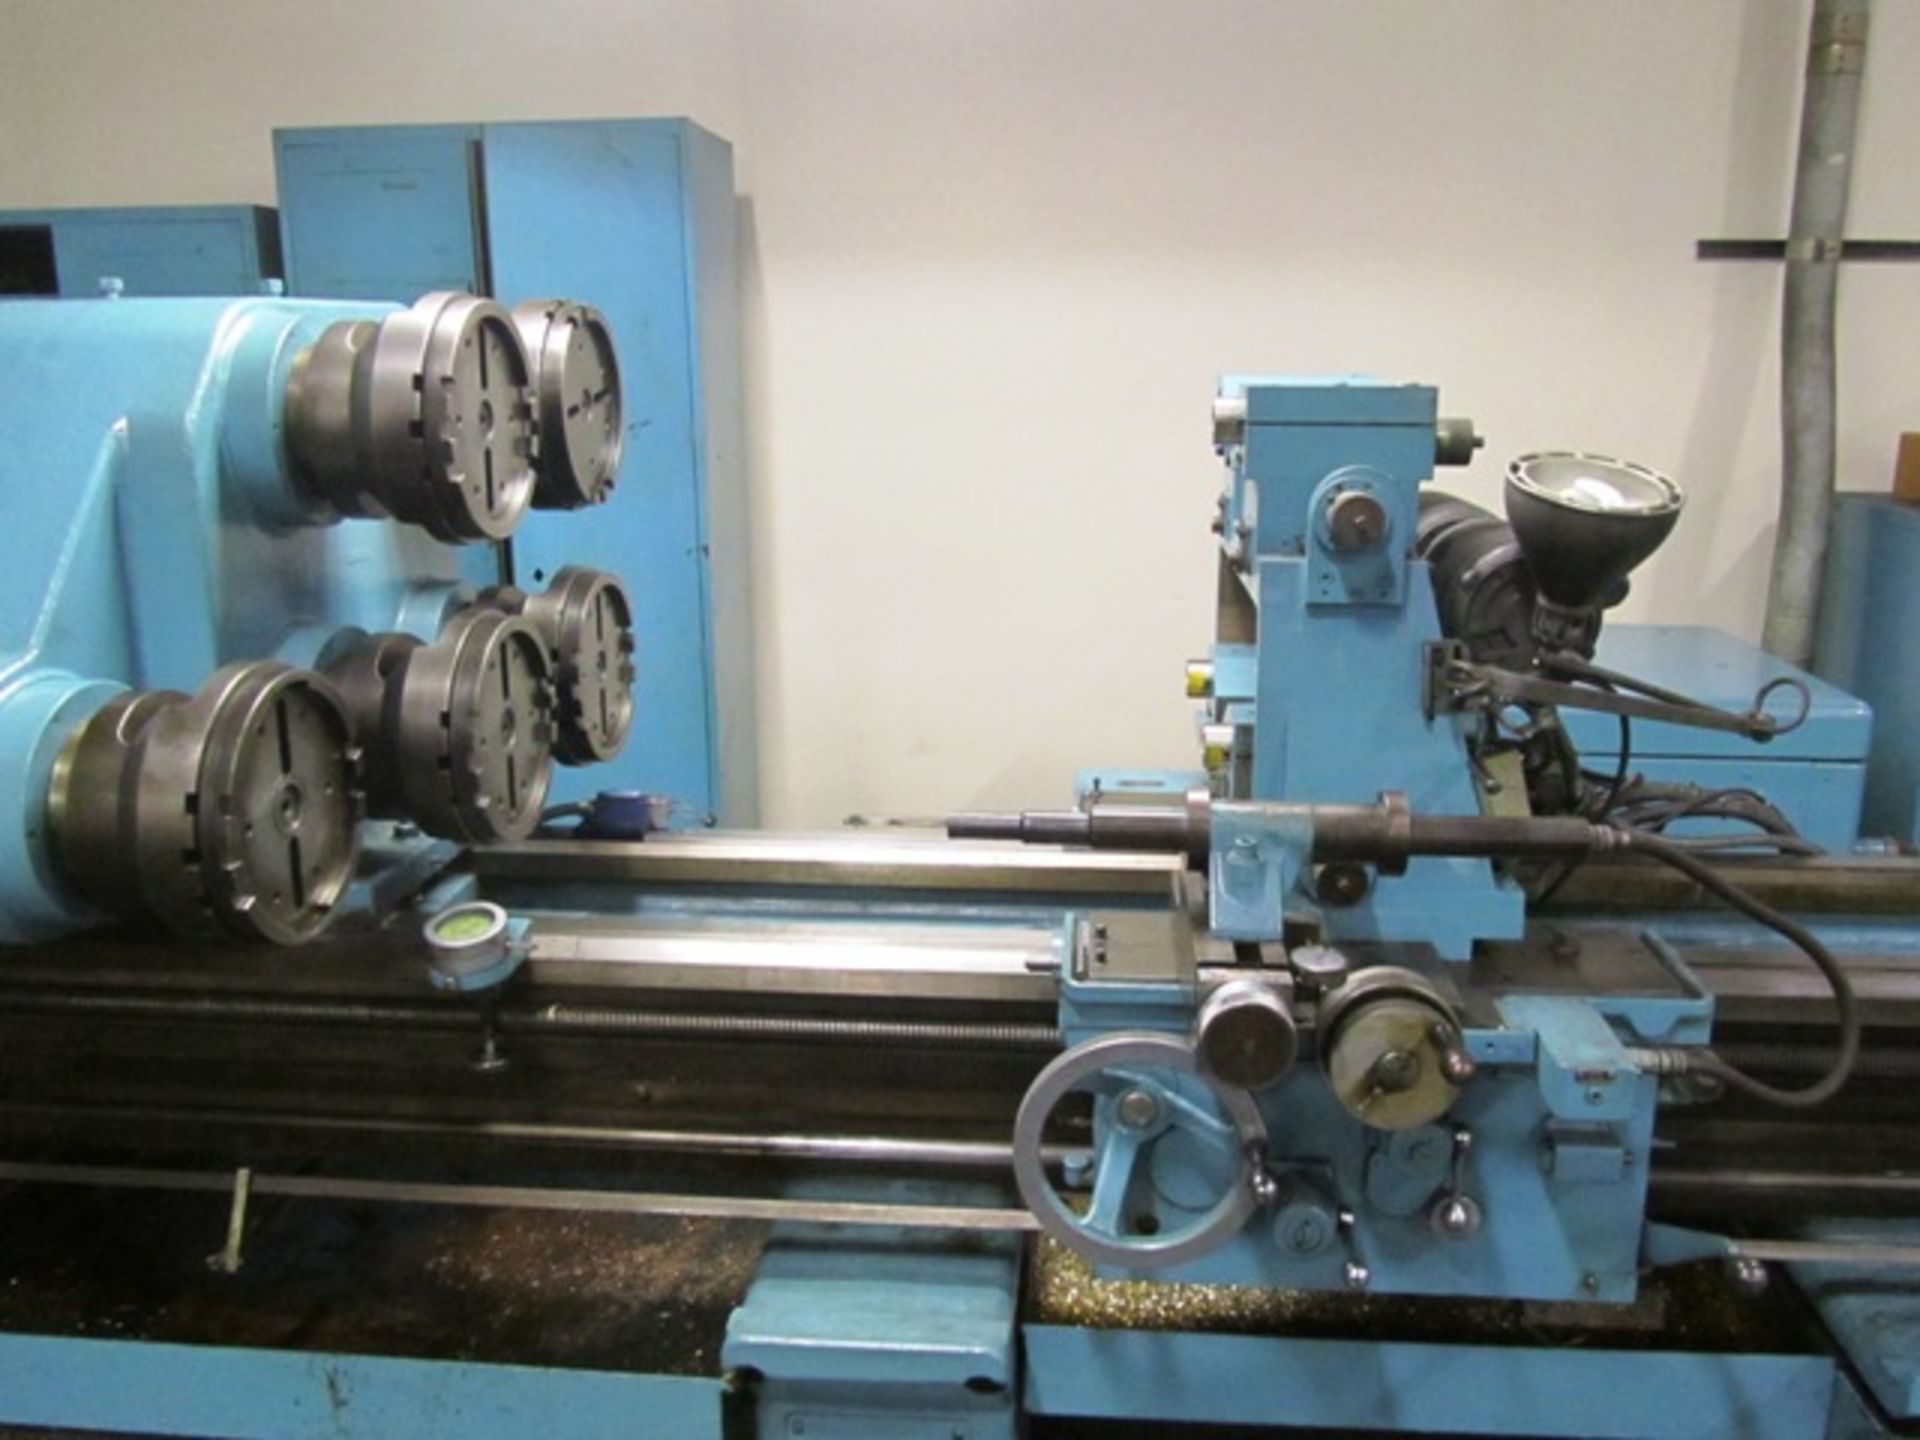 Monarch 19'' x 72'' Rotary Profile Contour Lathe with (2) Tool Post, Cross Slide, Spindle Speeds - Image 3 of 4